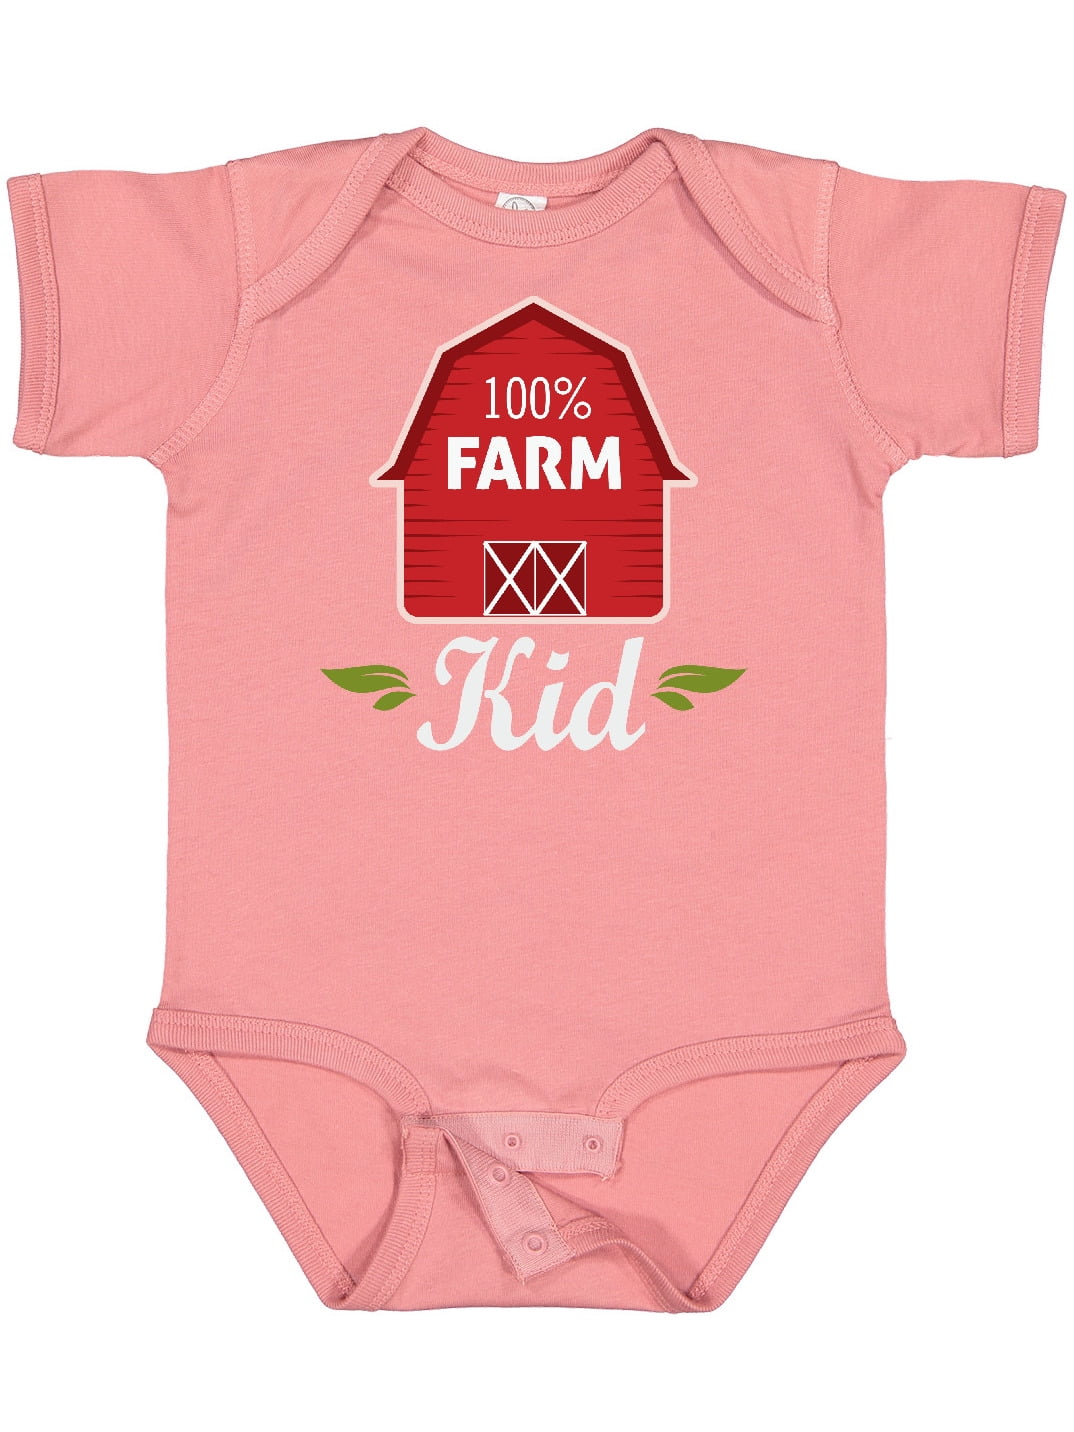 Coca-Cola Red Infant 6 Month Bodysuit One piece 100% Cotton BRAND NEW 